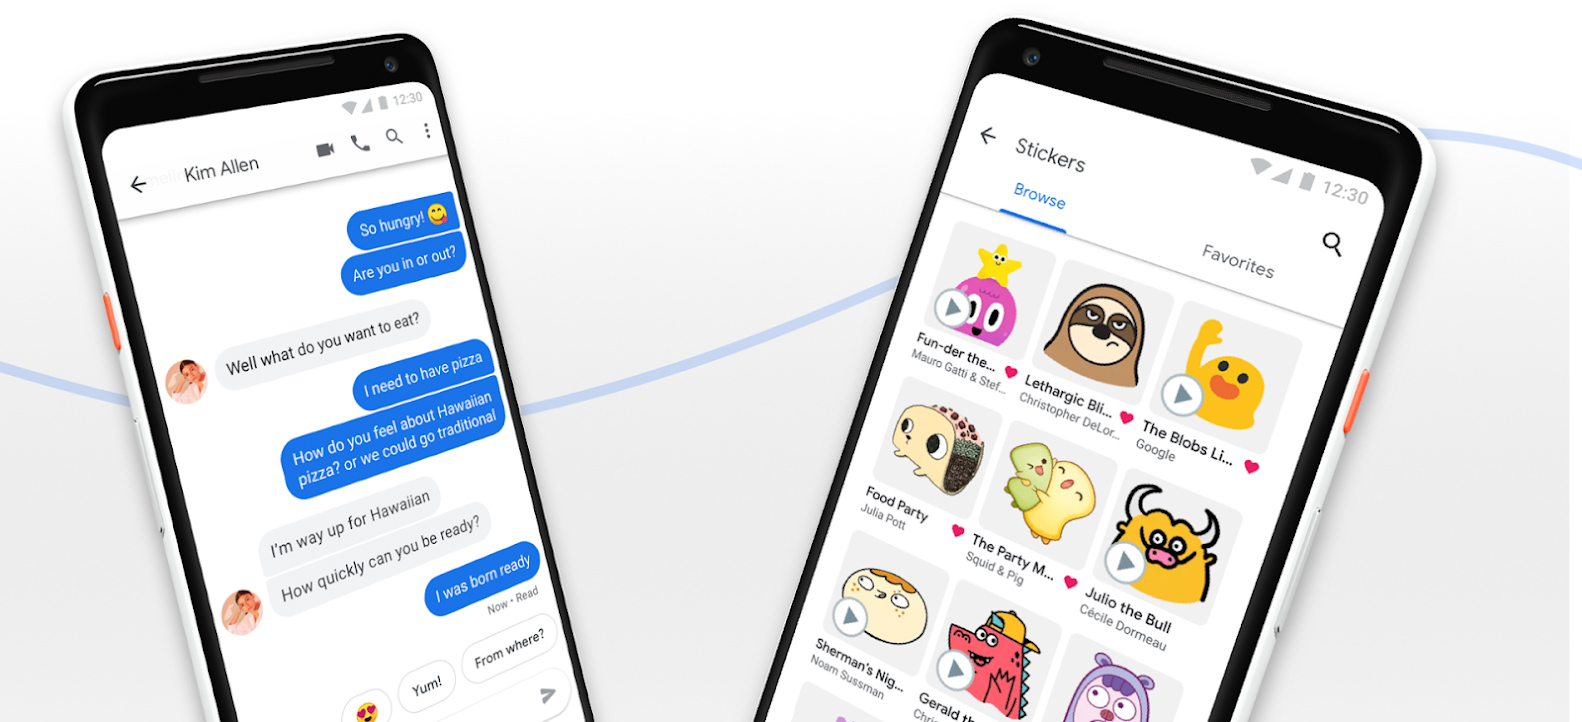 Google rolls out own RCS chat system to replace SMS